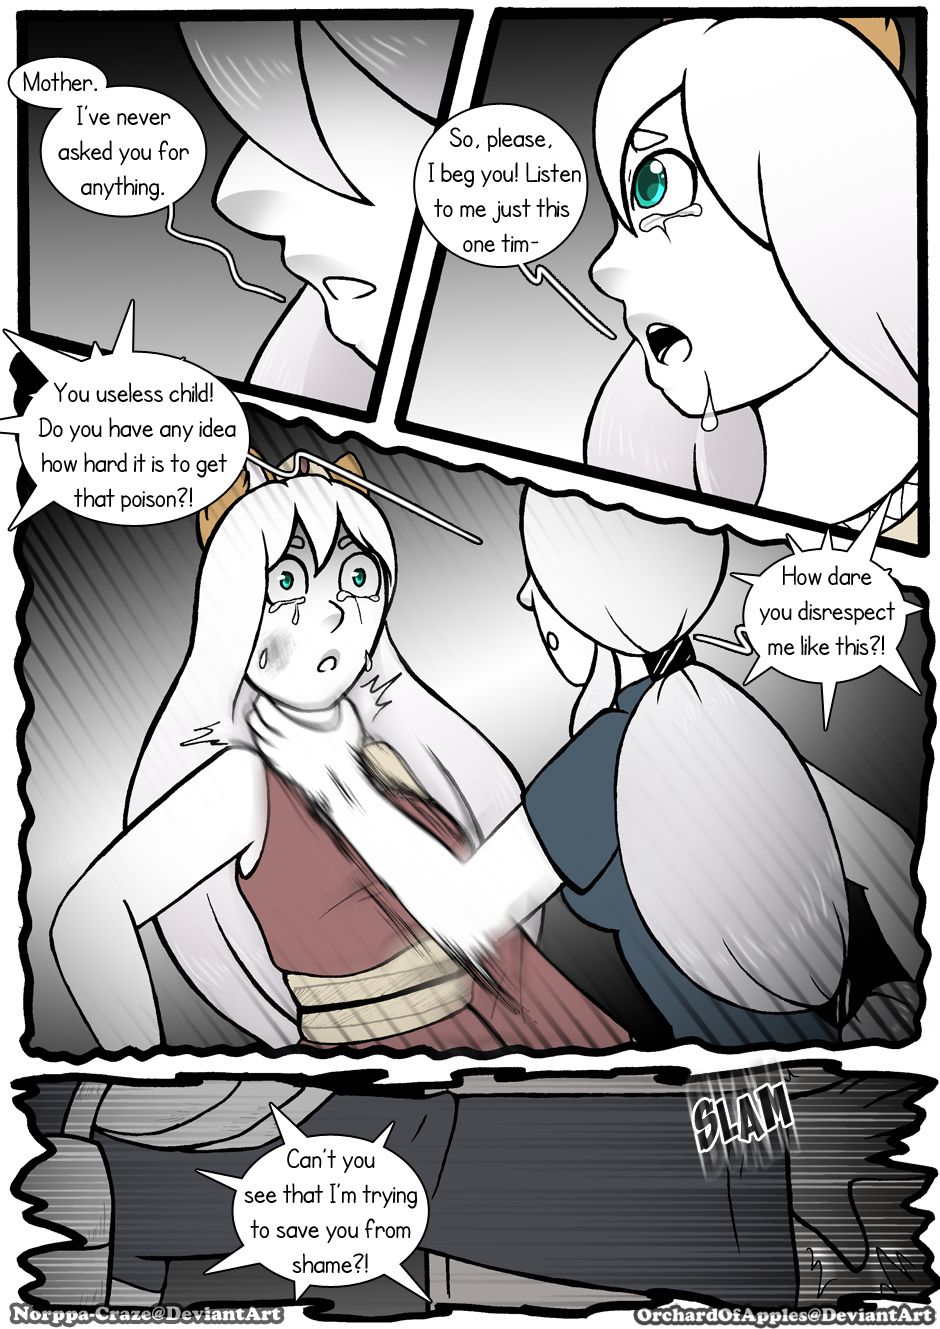 [Jeny-jen94] Between Kings and Queens [Ongoing] 279